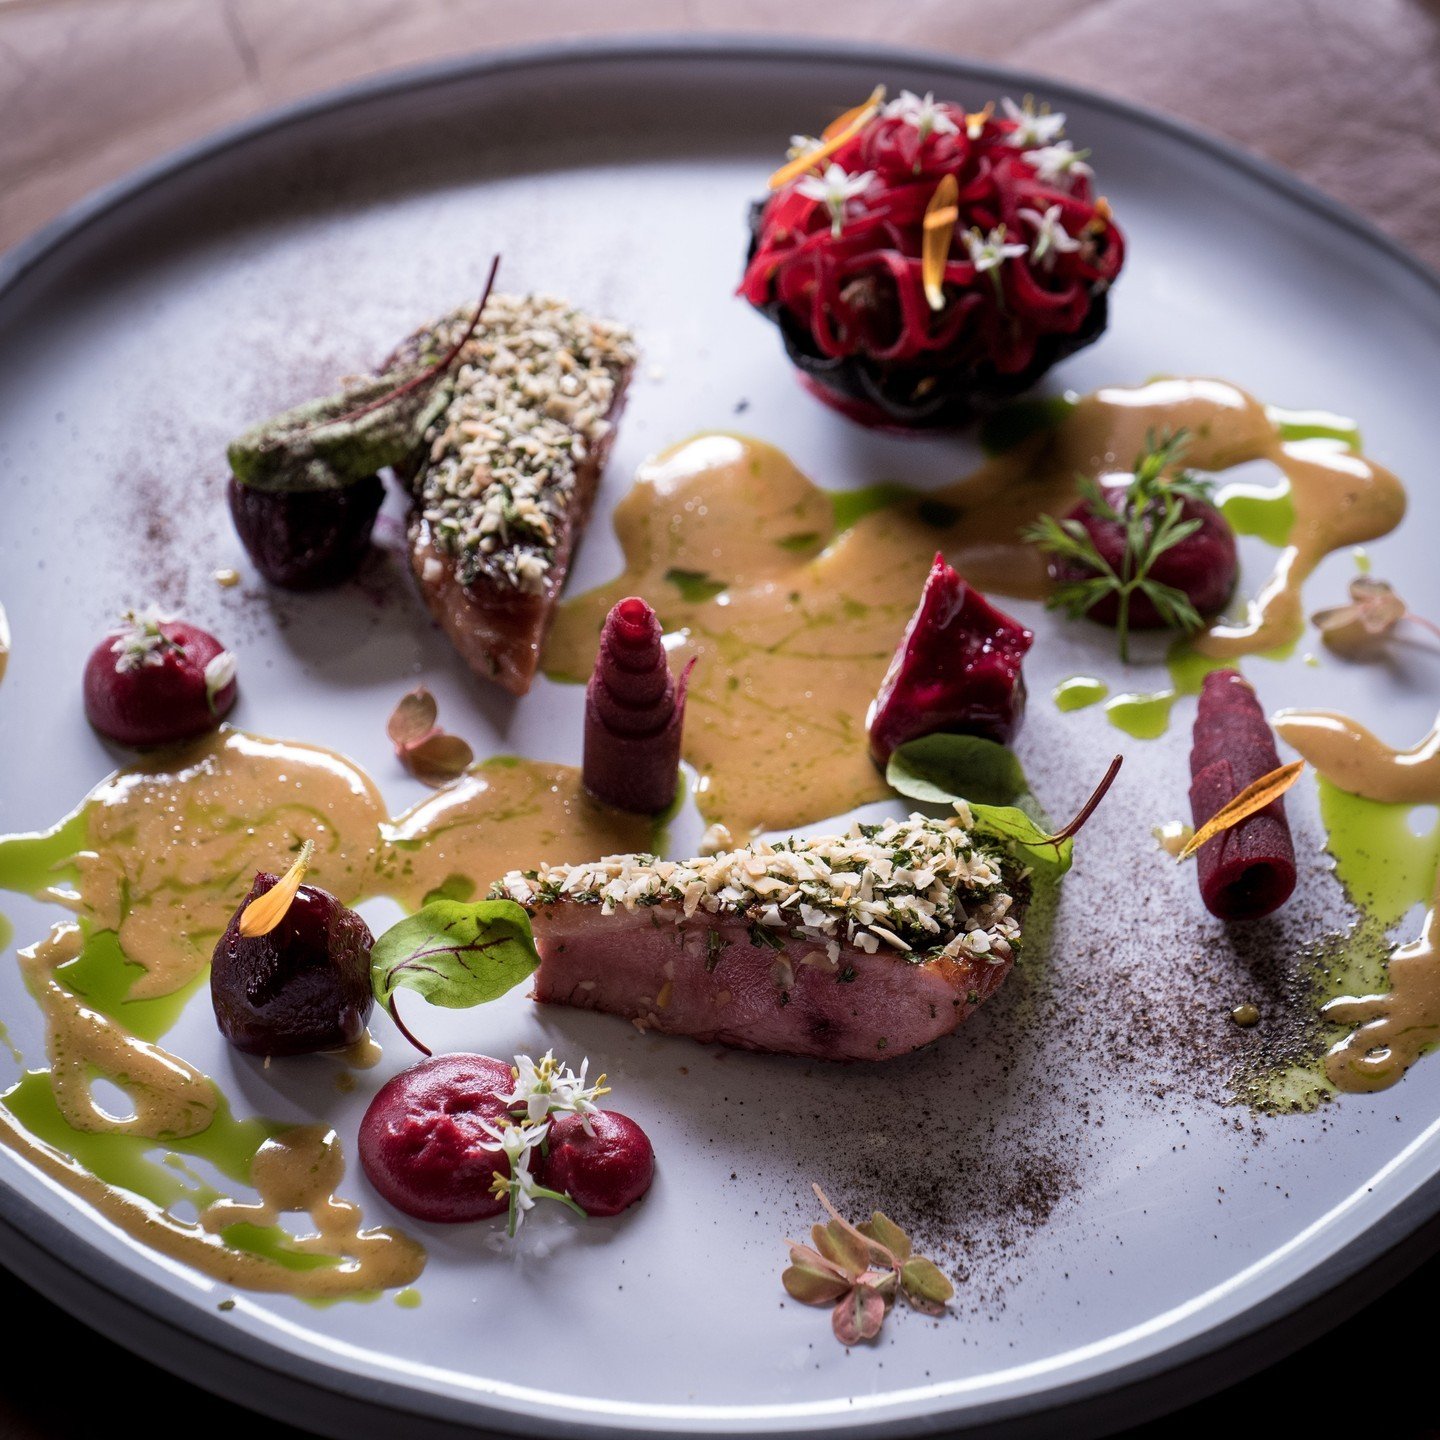 HAY SMOKED DUCK BREAST
 
Confit duck leg tart, pickled beetroot, roast beetroot, white miso velout&eacute;, almond crumb.

Book your table online (link in bio), email reception@thechefstable.co.za or phone 031 001 0200.

@eatoutguide 
@jhp_gourmet_gu